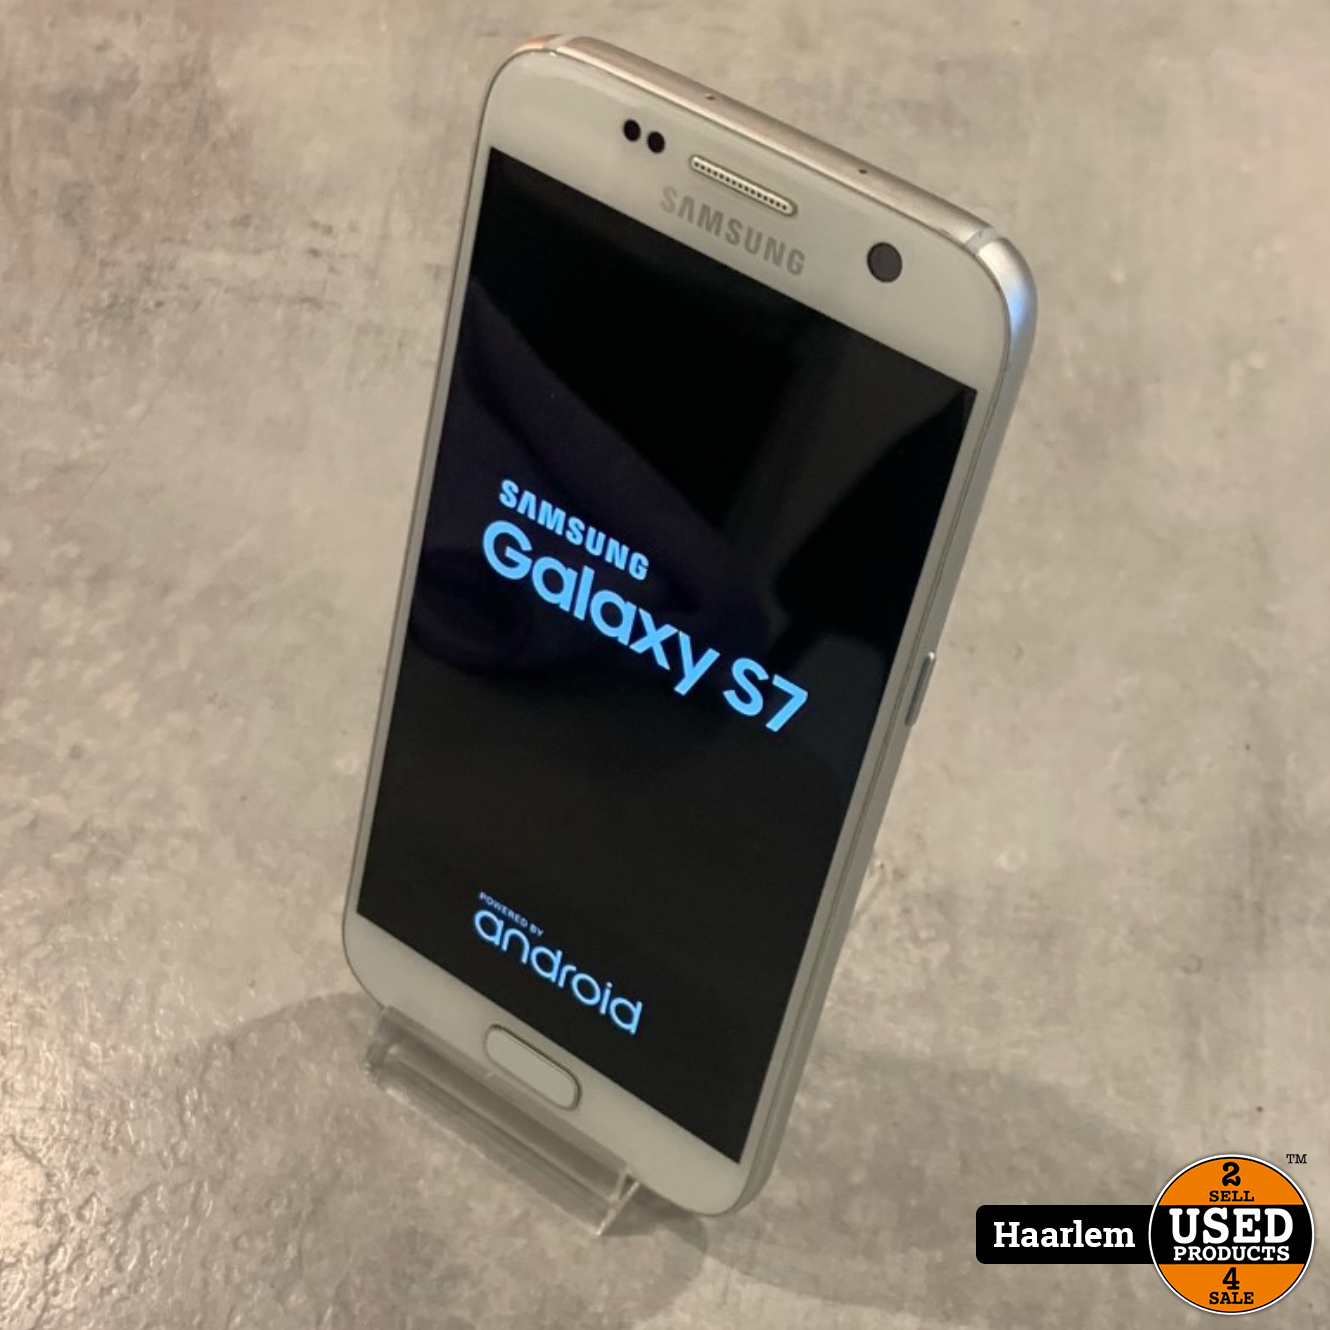 vieren Plenaire sessie nabootsen Samsung Galaxy S7 32Gb White in prima staat - Used Products Haarlem  Cronjéstraat